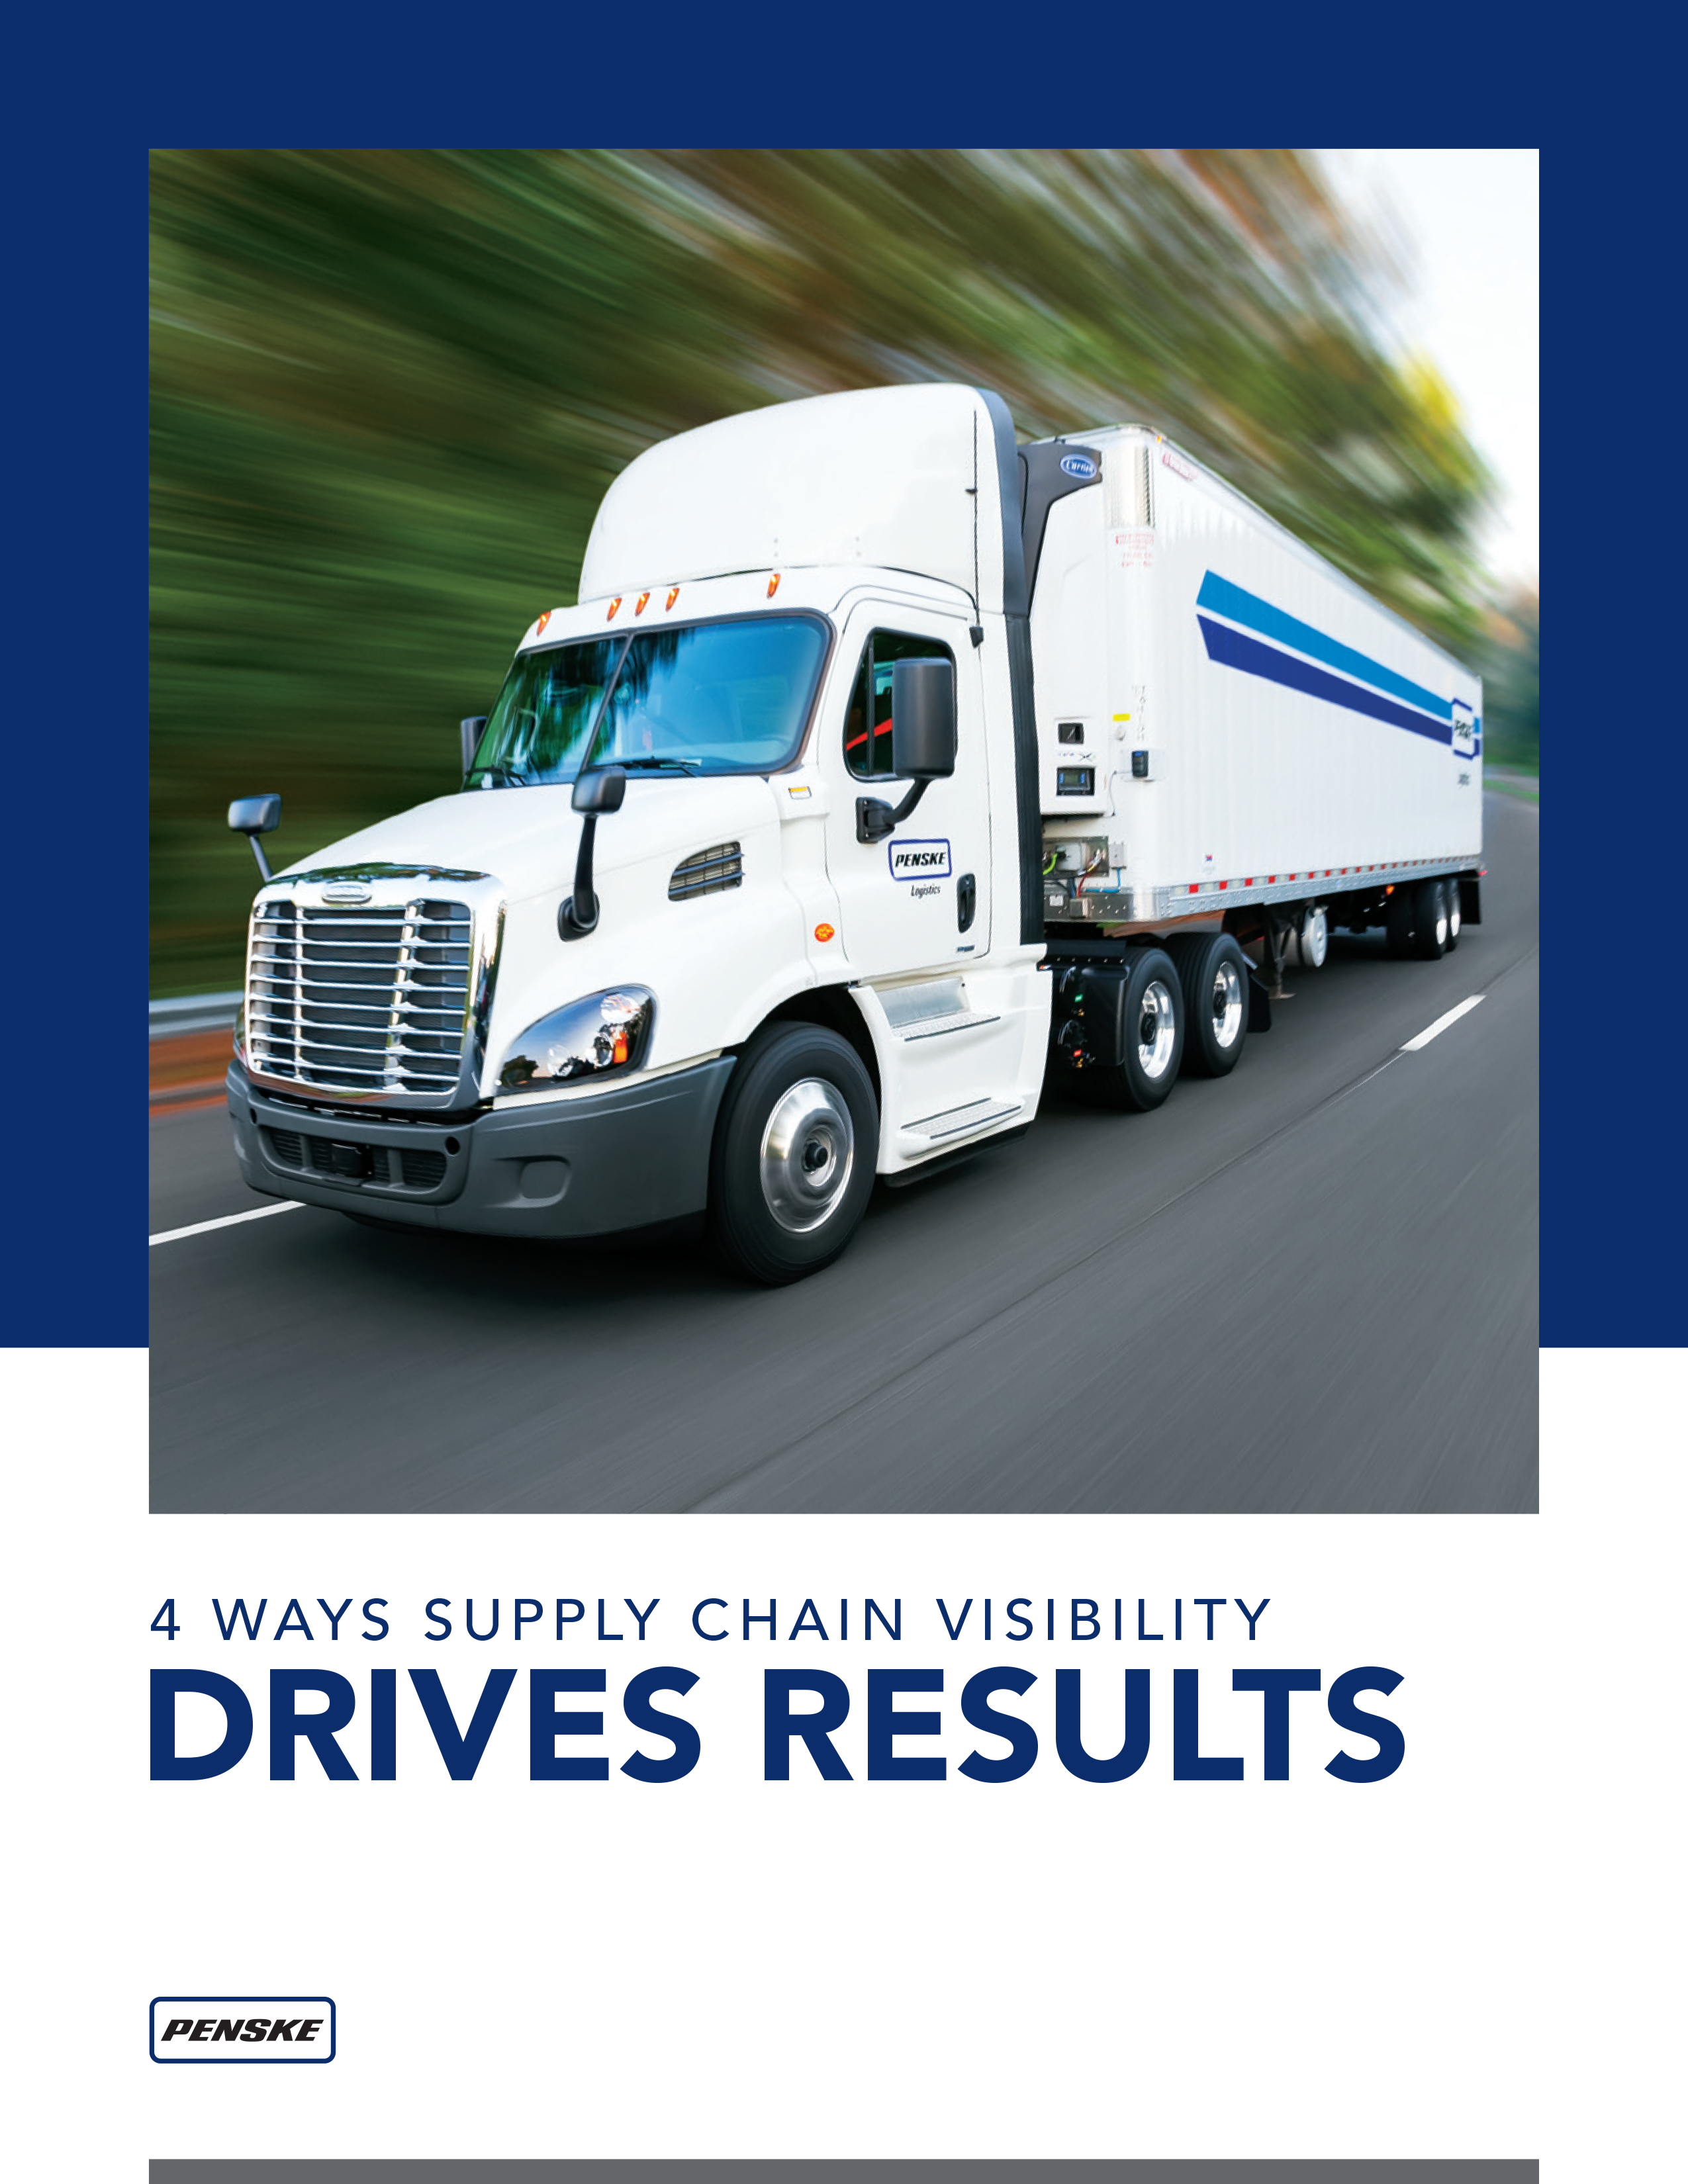 Supply Chain Visibility Guide